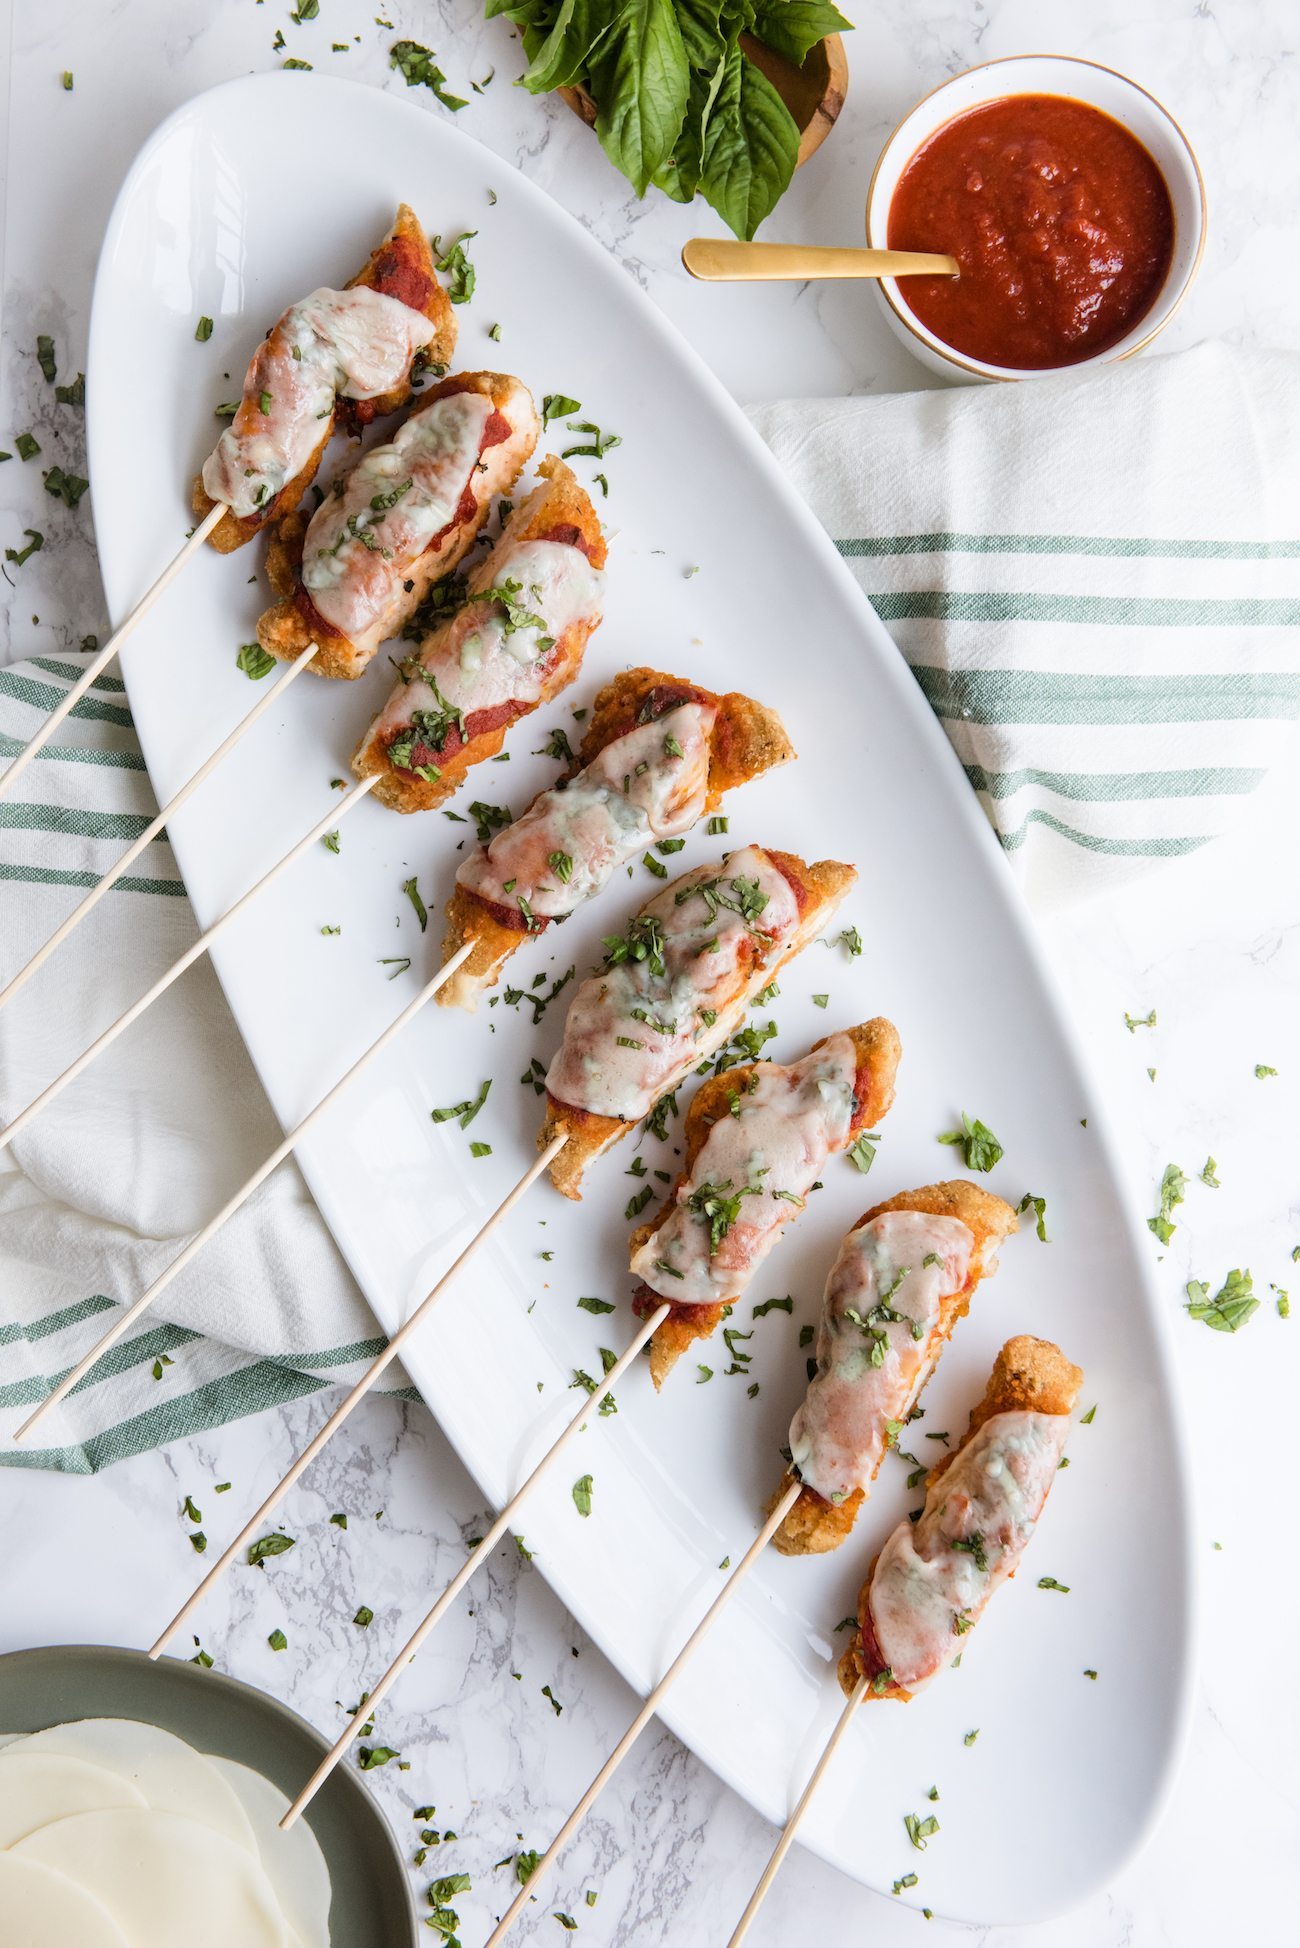 Mini Chicken Parm on a Stick | Entertaining ideas, party appetizers, party ideas and more from @cydconverse